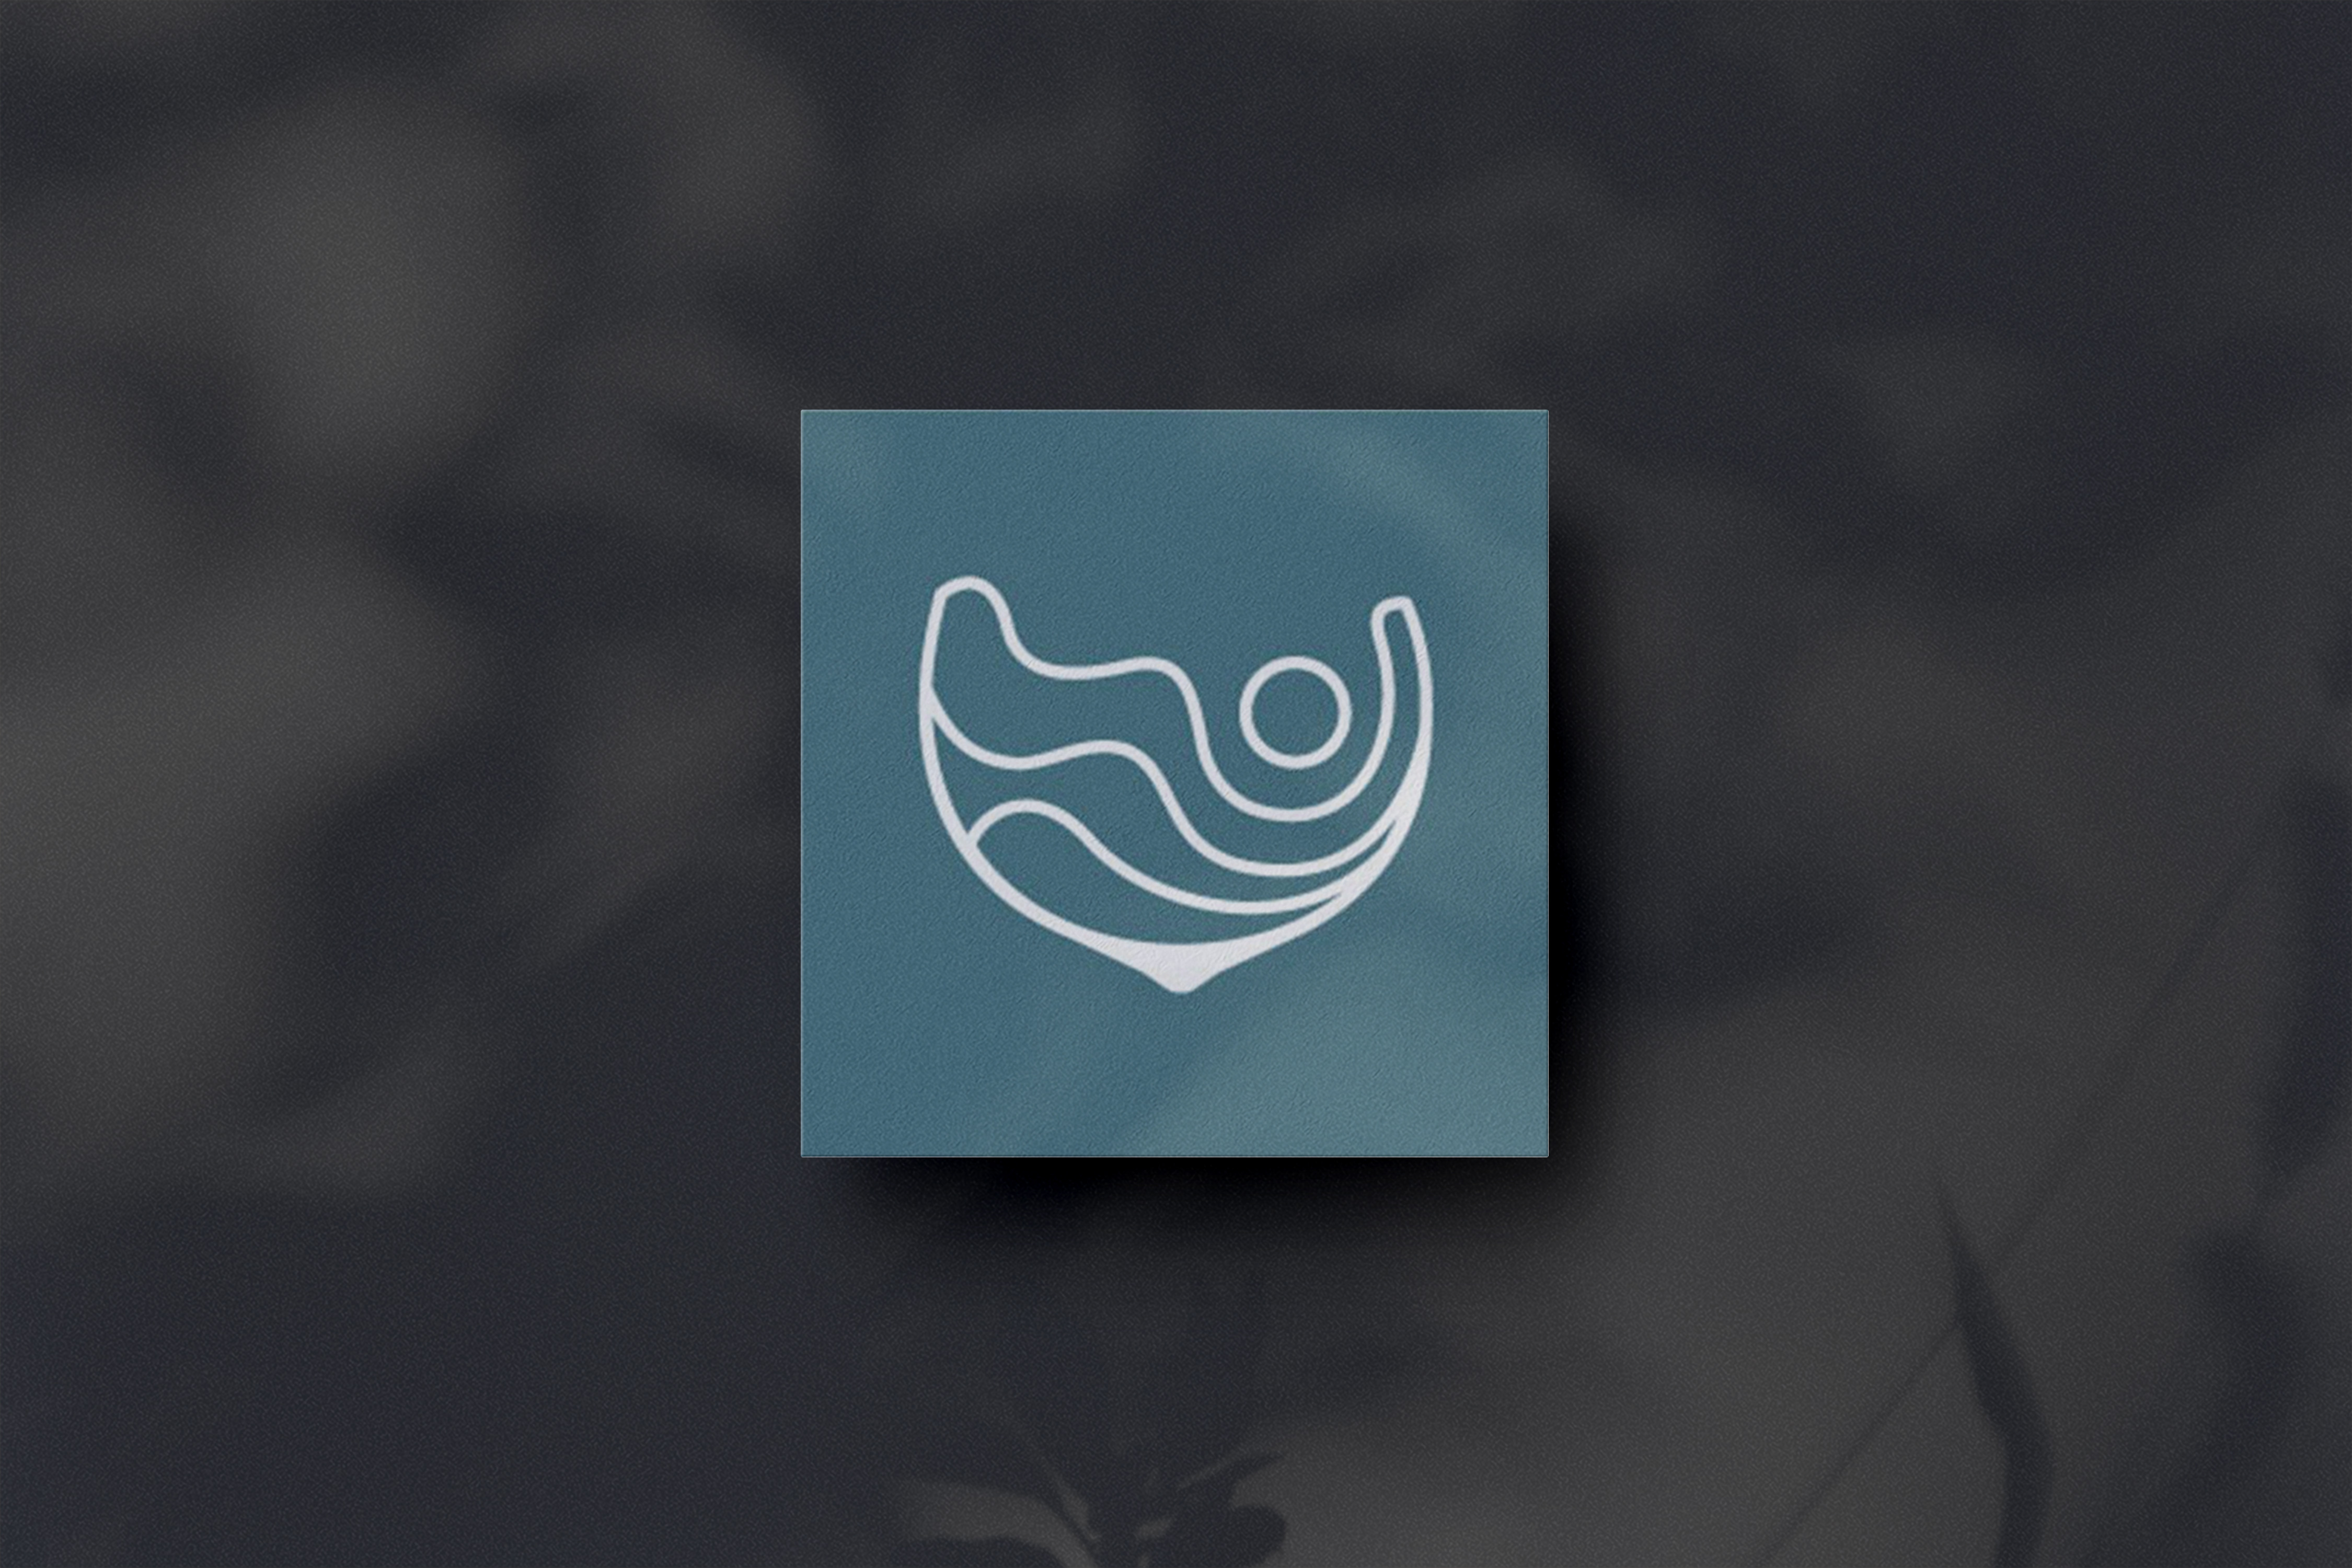 Mockup of logo icon design for Surf A Vino, a tourism company specializing in surf lessons and wine tasting for women